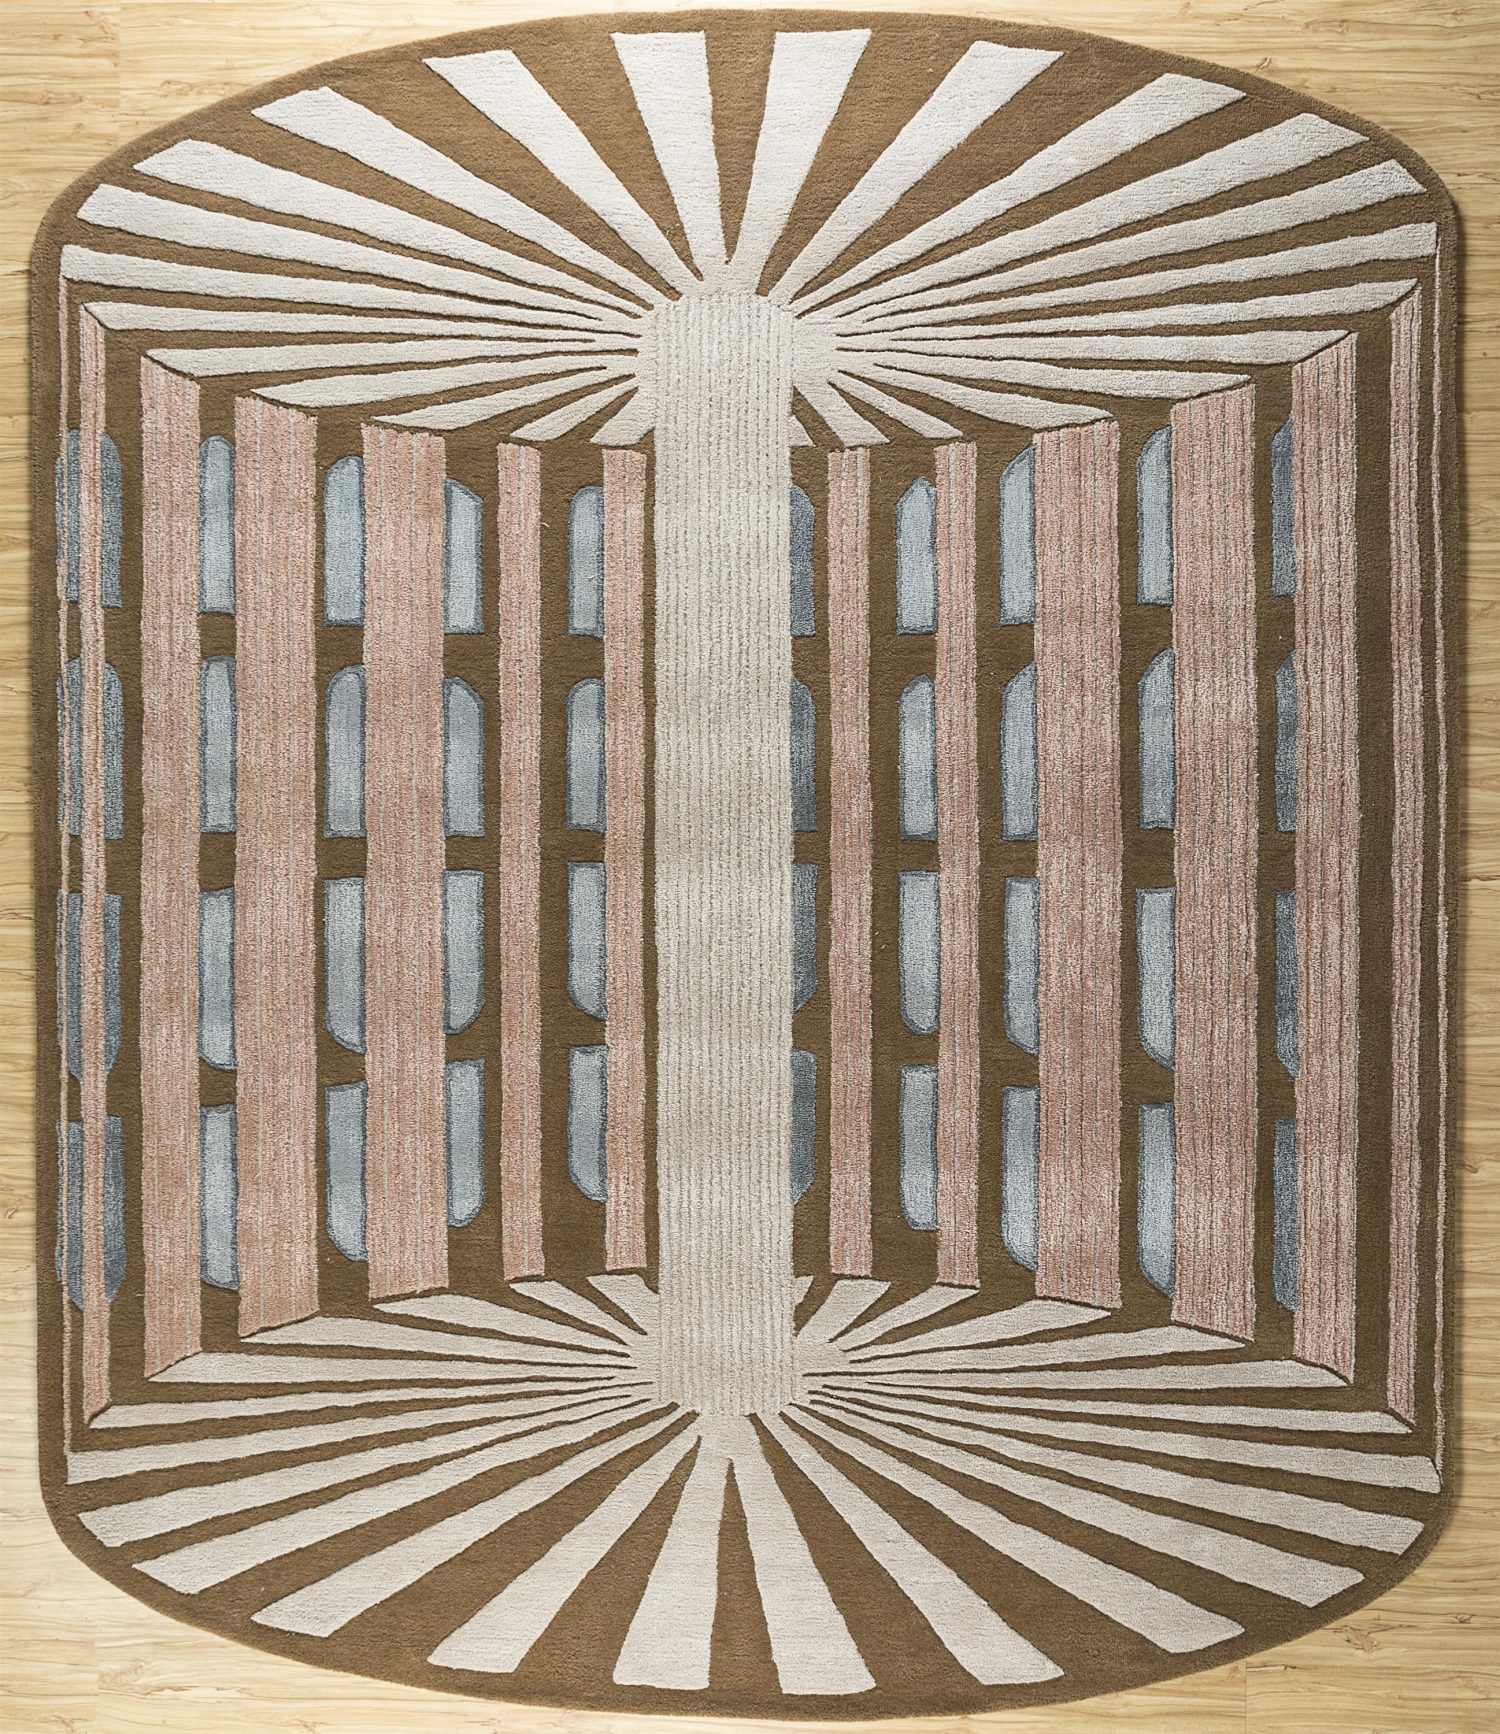 The rug brings alive the architectonical Sundial, the Jantar Mantra, built in the 18th Century.